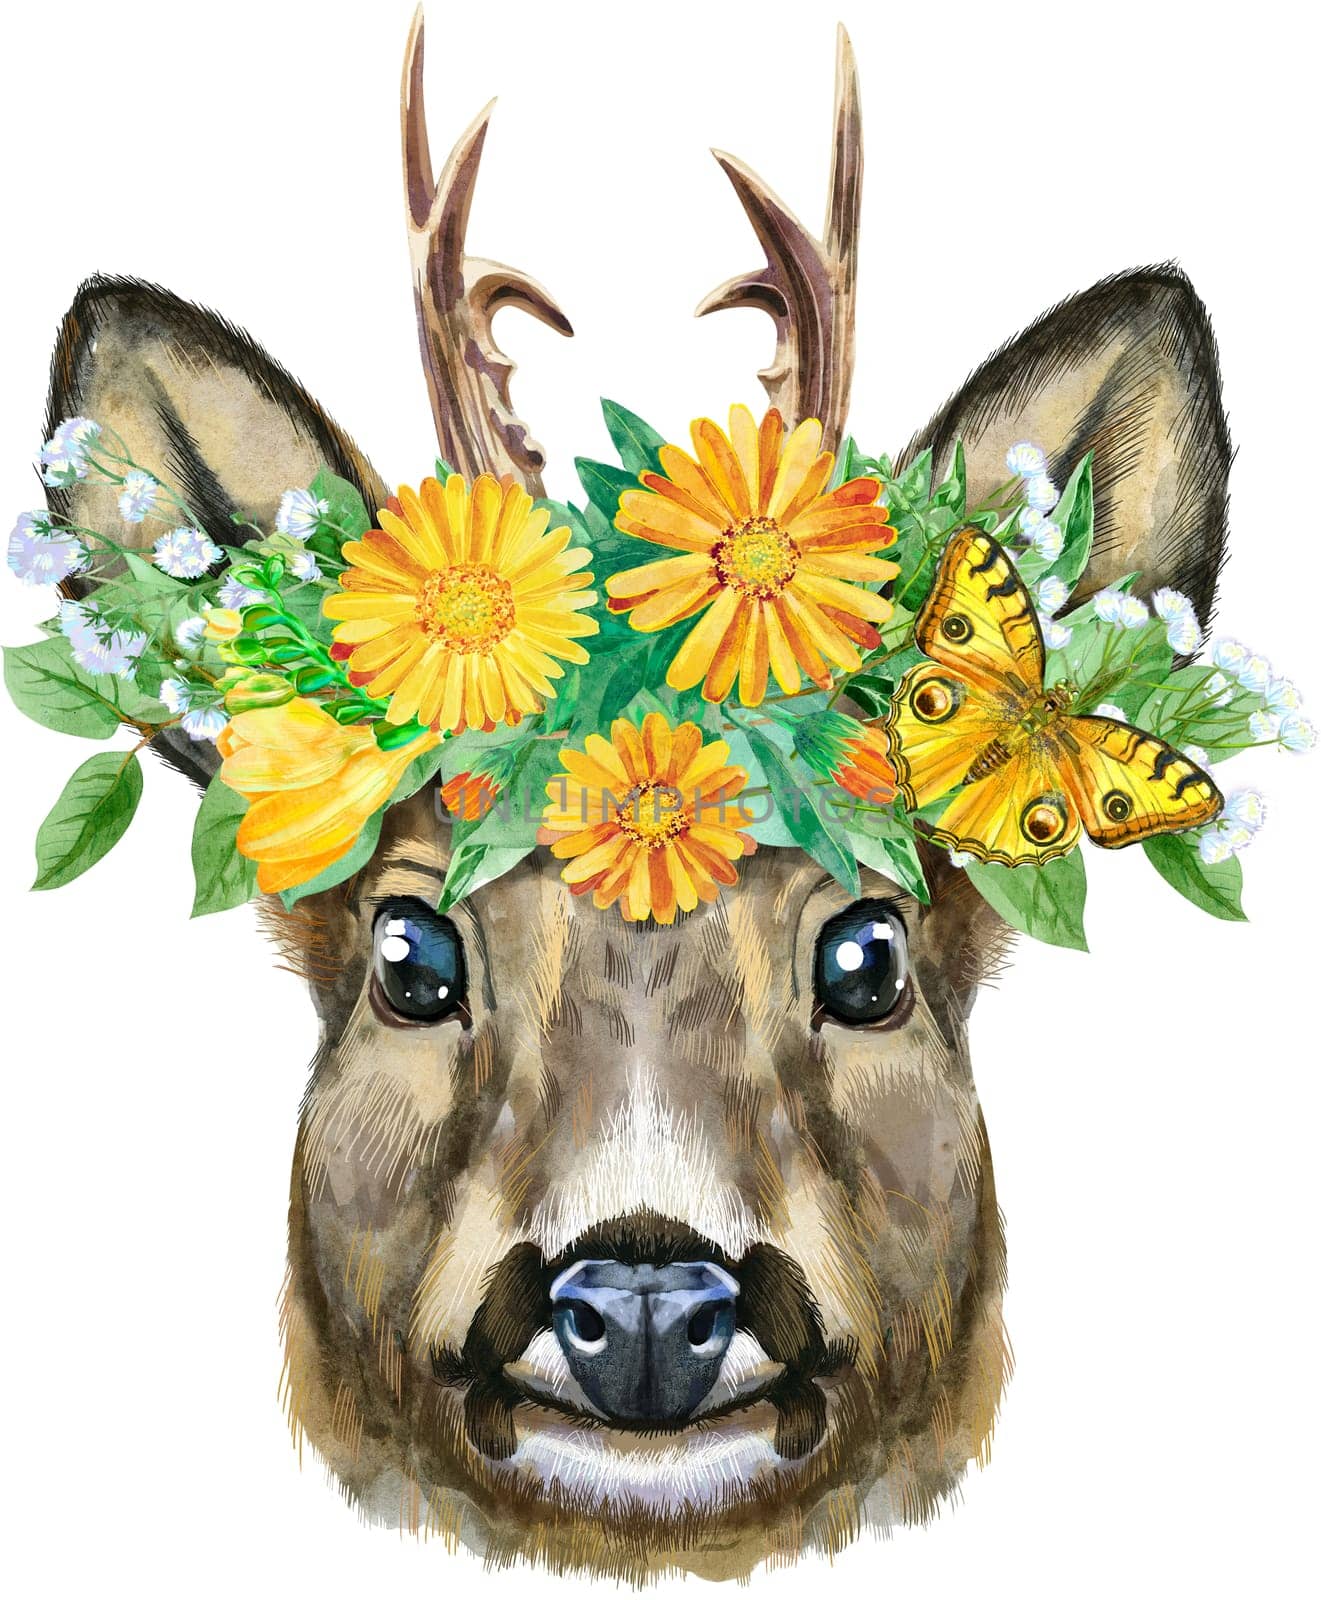 Watercolor portrait of a roe deer in a wreath of flowers on white background by NataOmsk